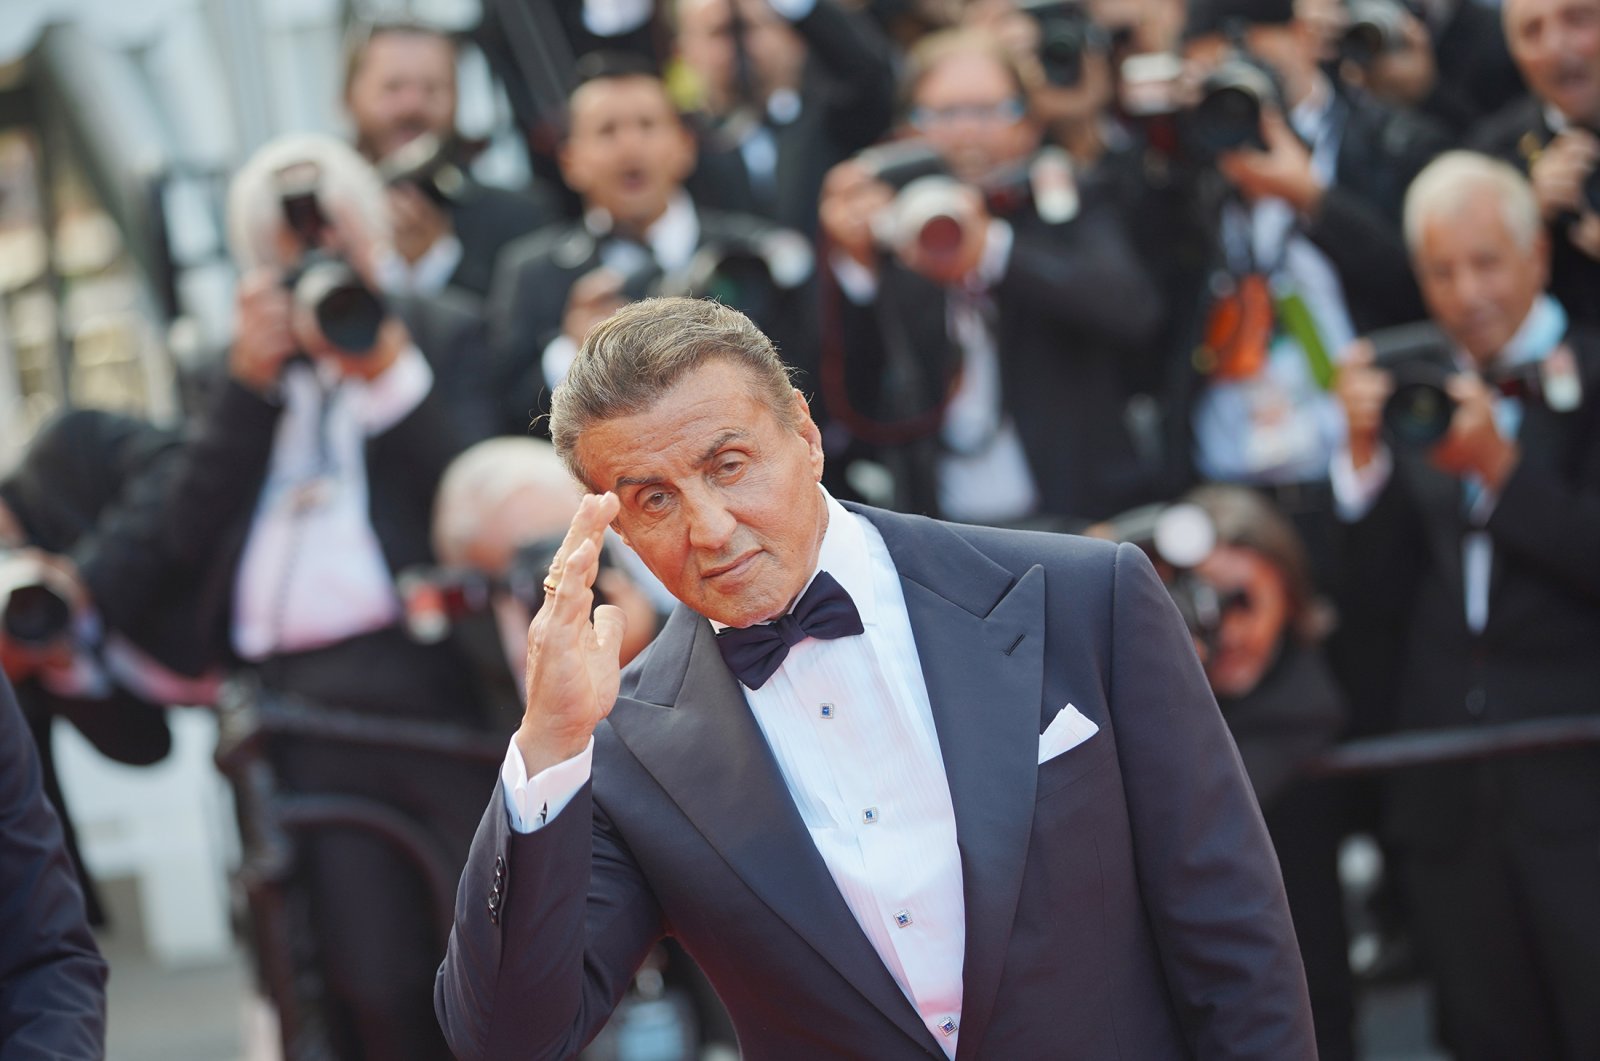 Sylvester Stallone attends the closing ceremony screening of "The Specials" during the 72 Cannes Film Festival in Cannes, France, on May 25, 2019. (Shutterstock)